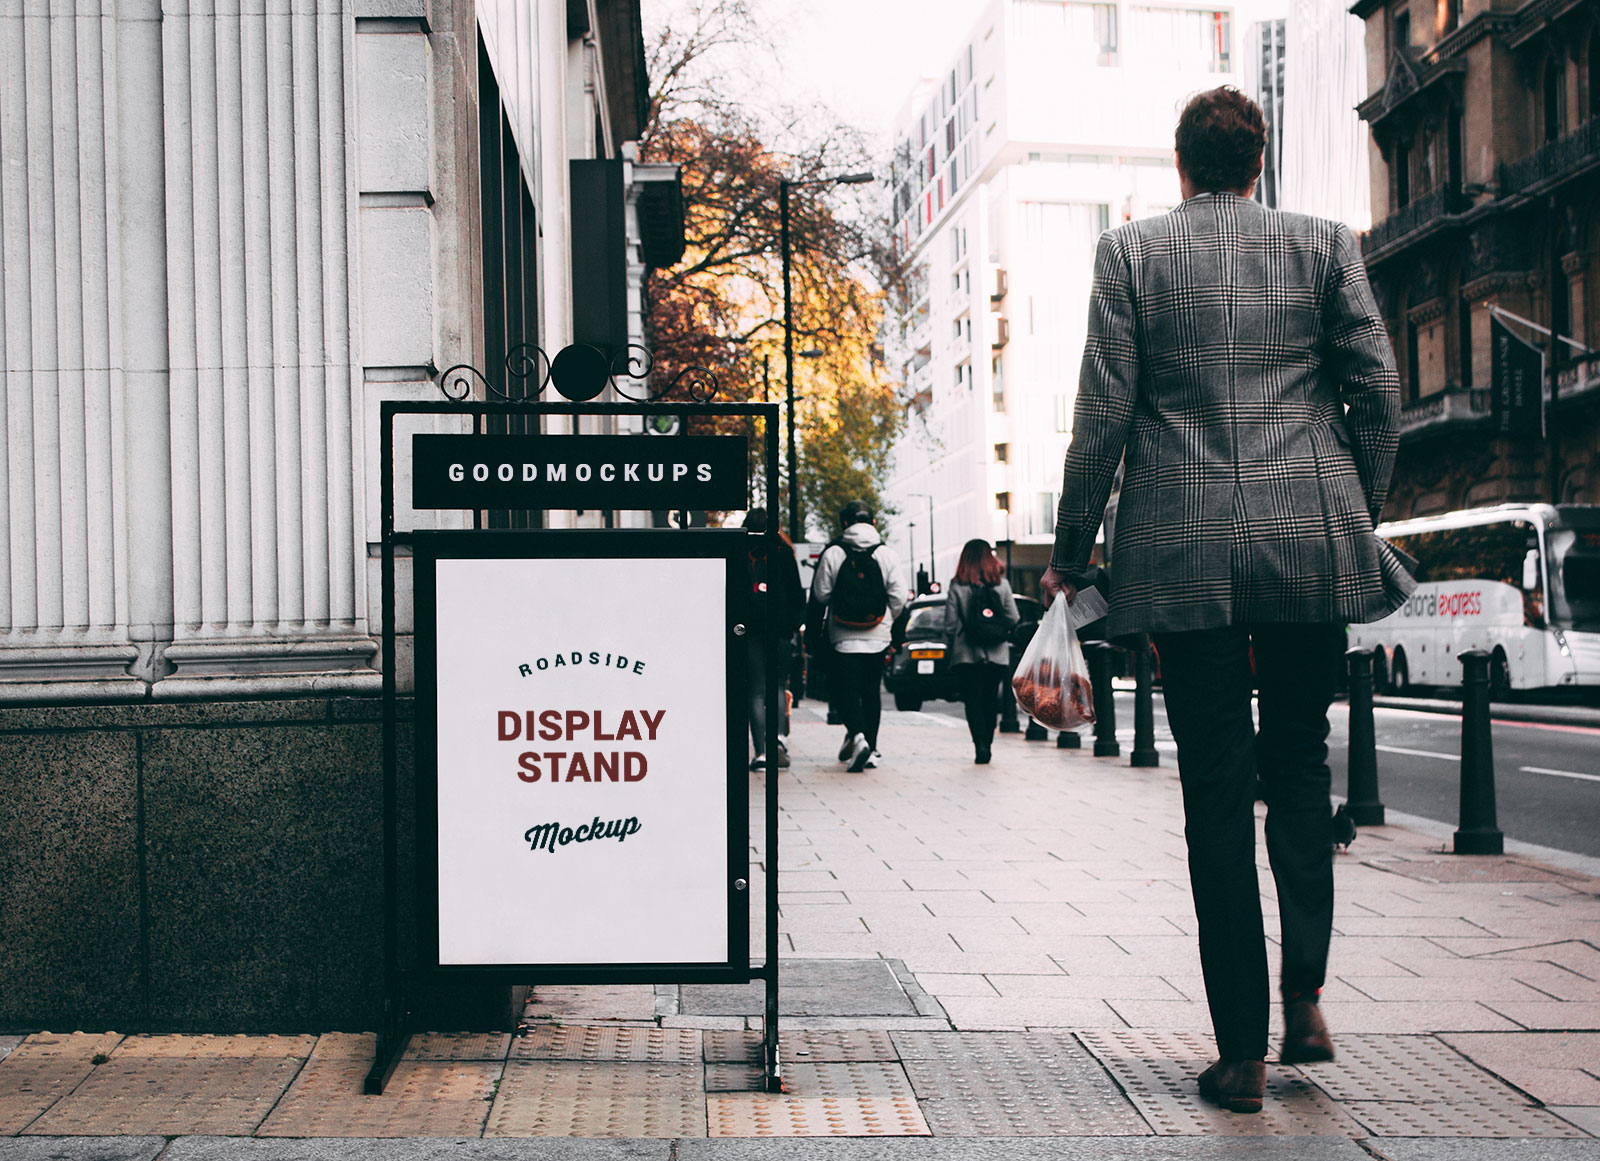 Free-Outdoor-Roadside-Display-Stand-Mockup-PSD